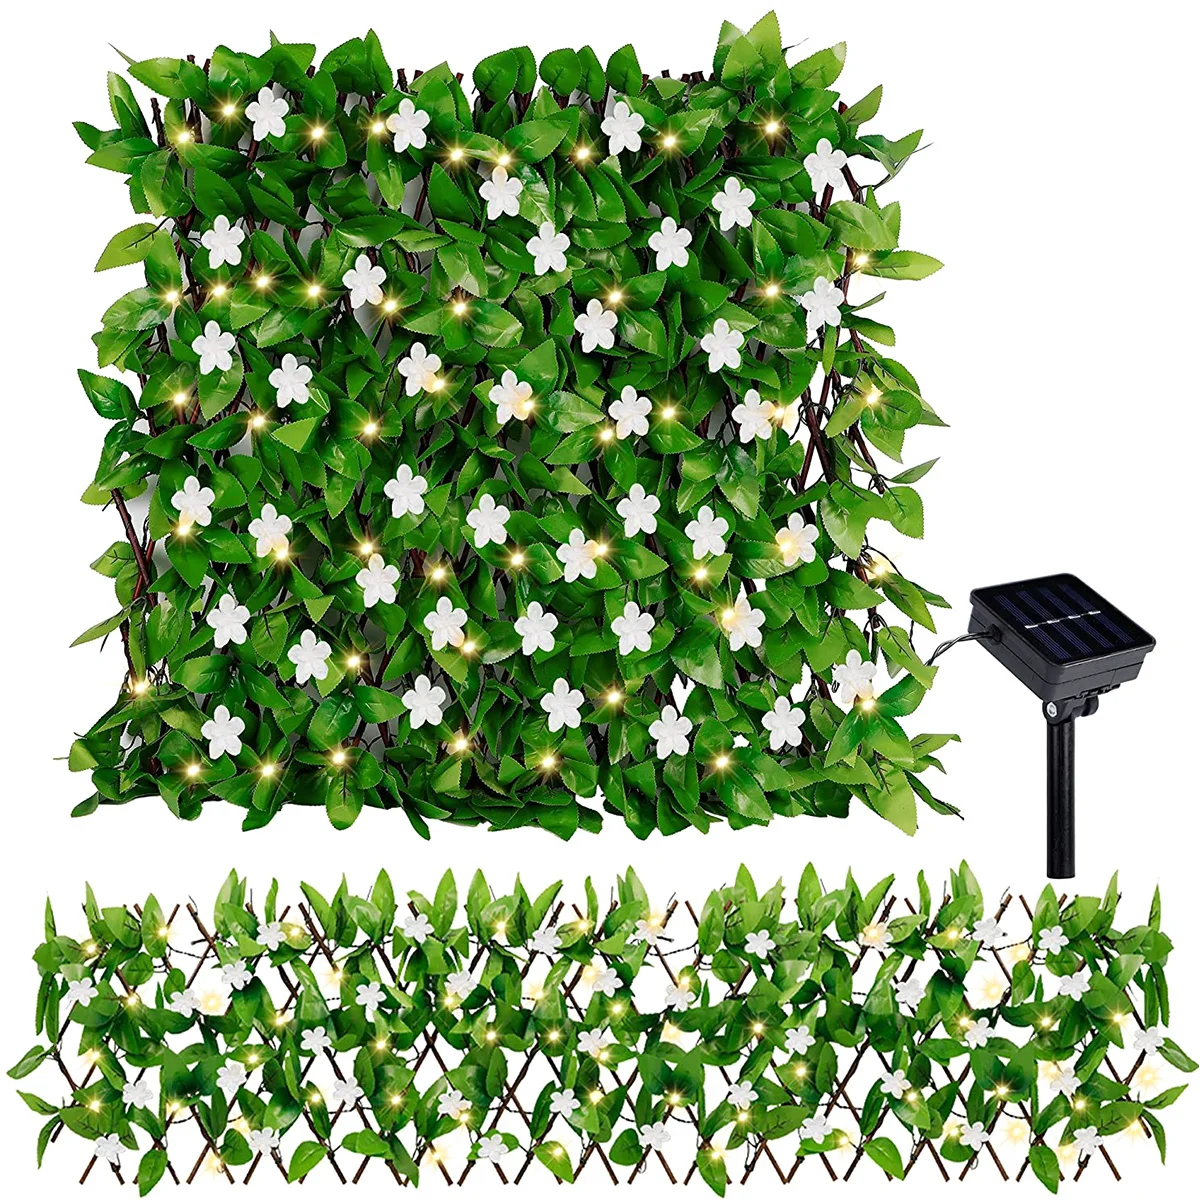 

Expandable Fence Privacy Screen 30x180CM Artificial Fencing Panel with 3 Modes Solar Lights Faux Ivy Hedge Flower Fence Indoor O